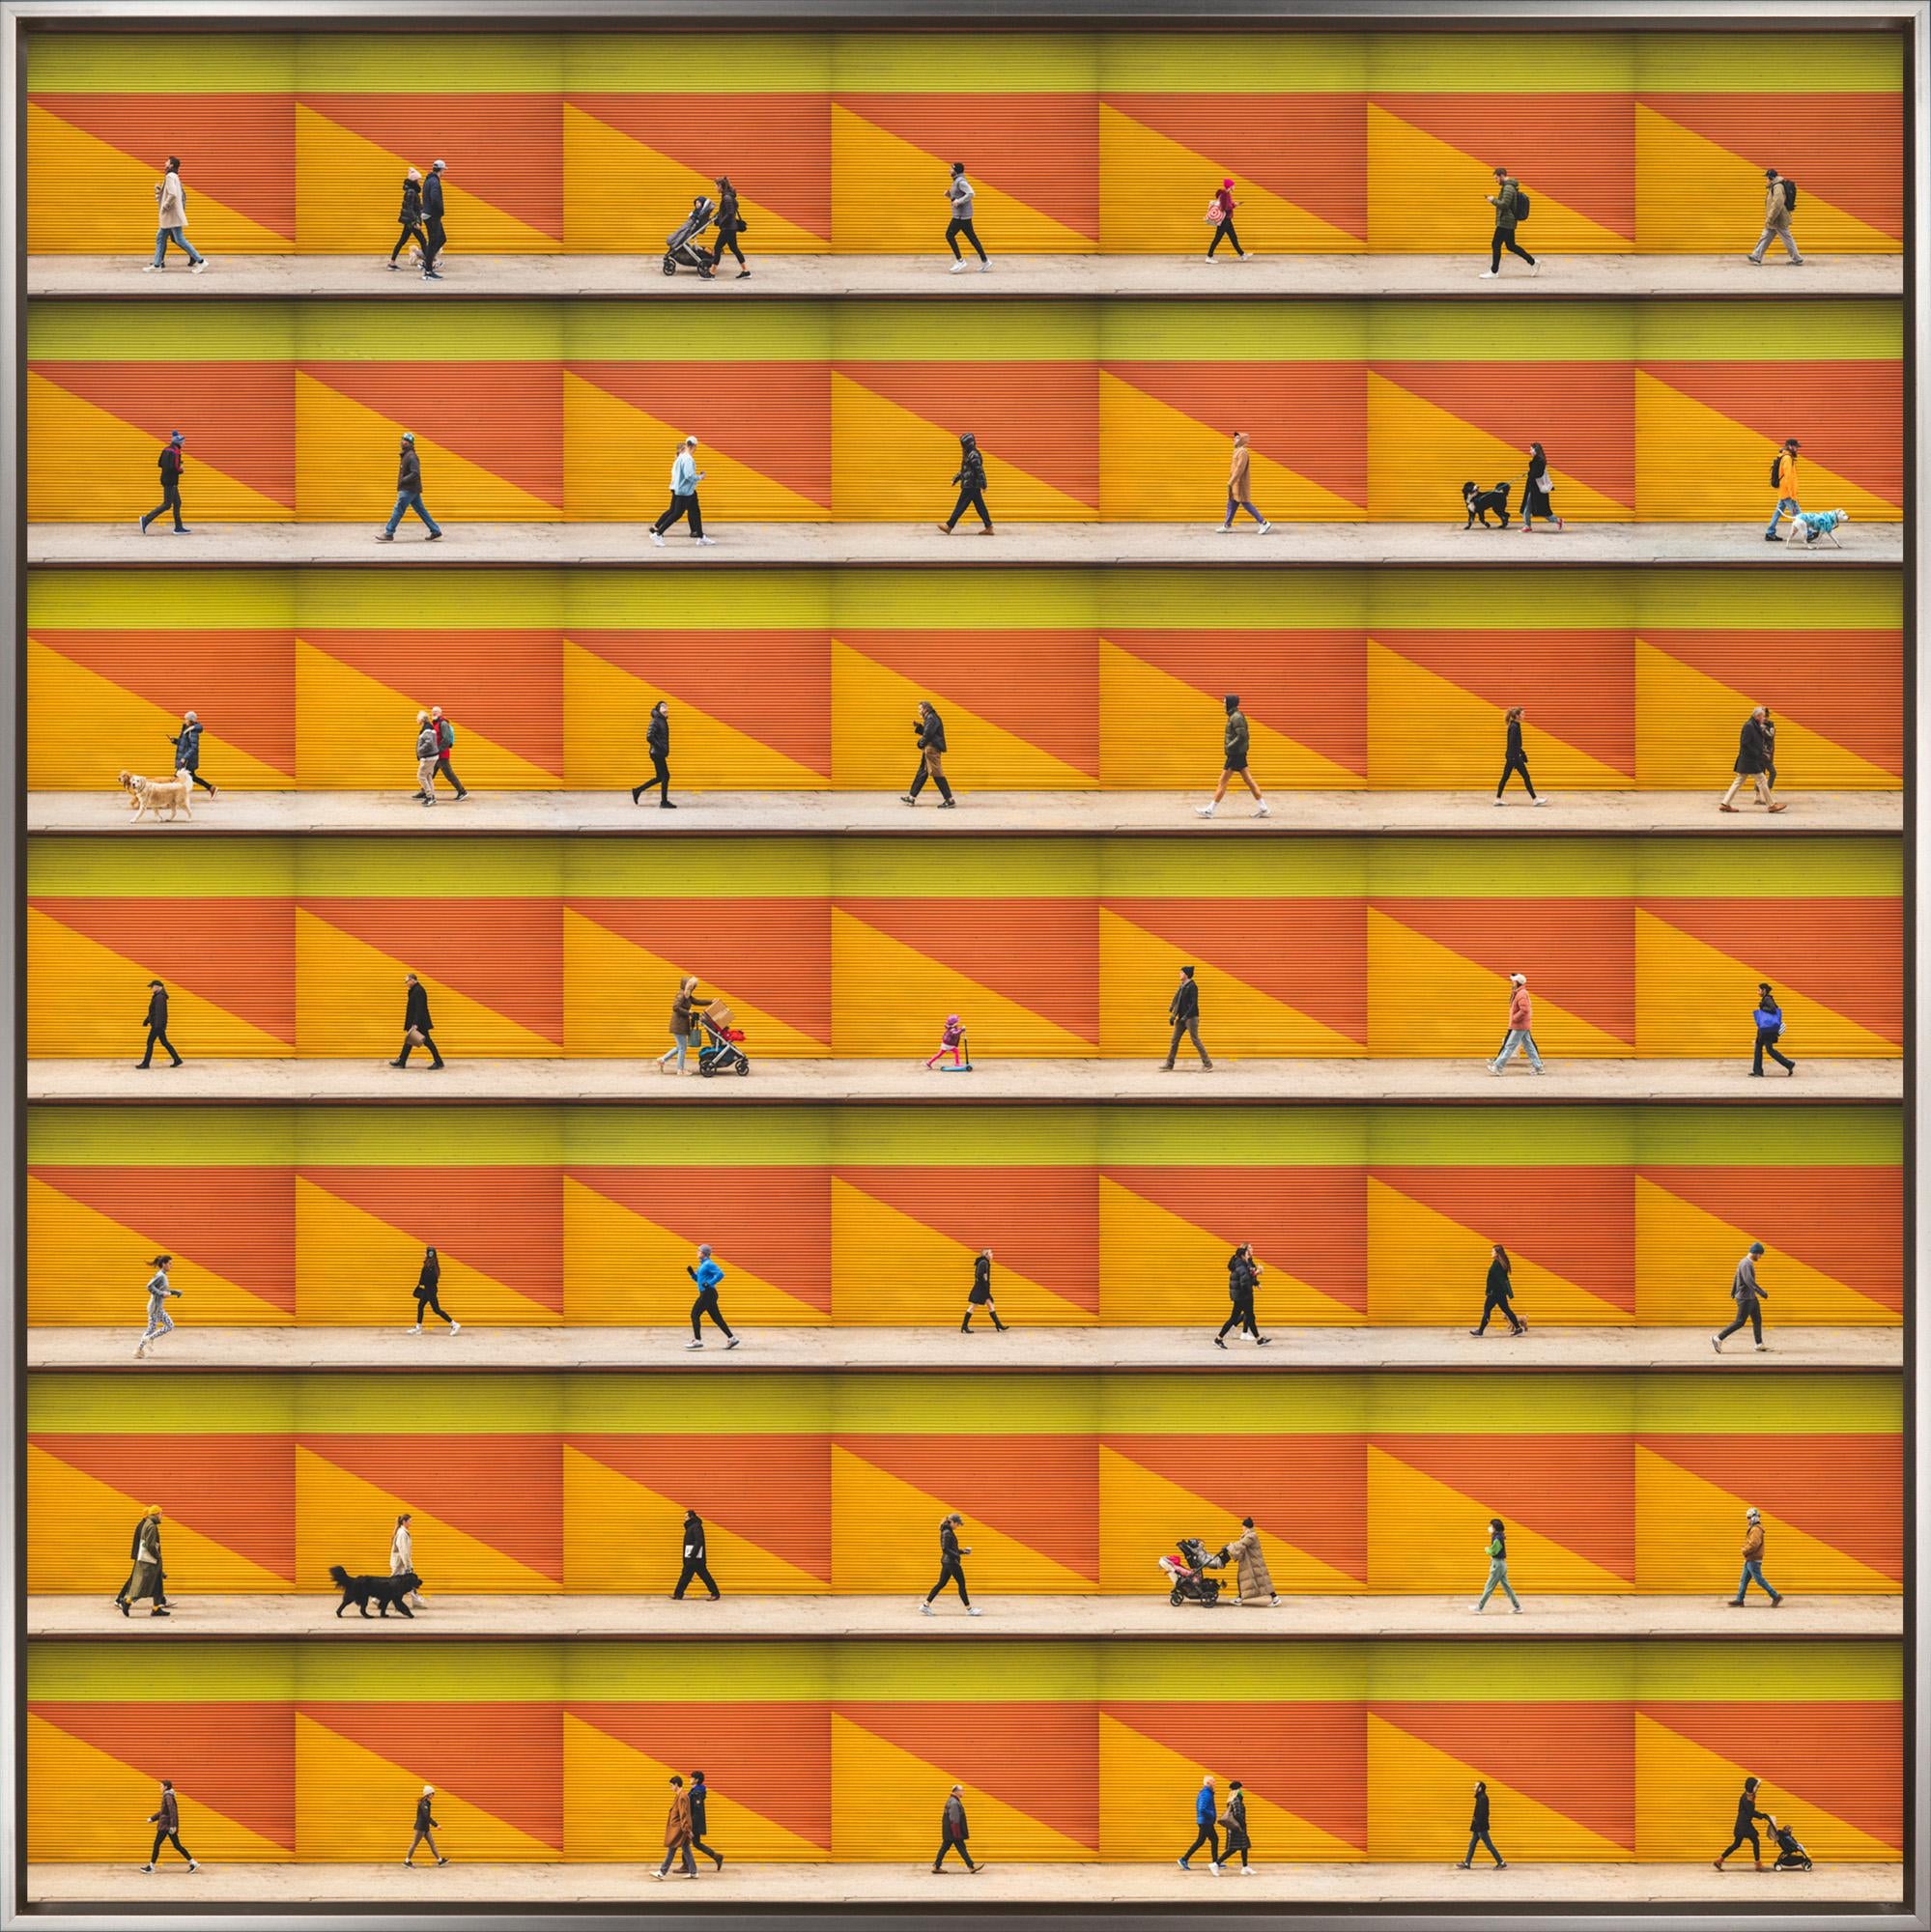 "Hudson Square, NYC" is a framed photograph on aluminum by Xan Padron, depicting a compilation of walking figures set against a vibrant patterned background. Padron's signature technique of splicing together individual photographs to craft a larger